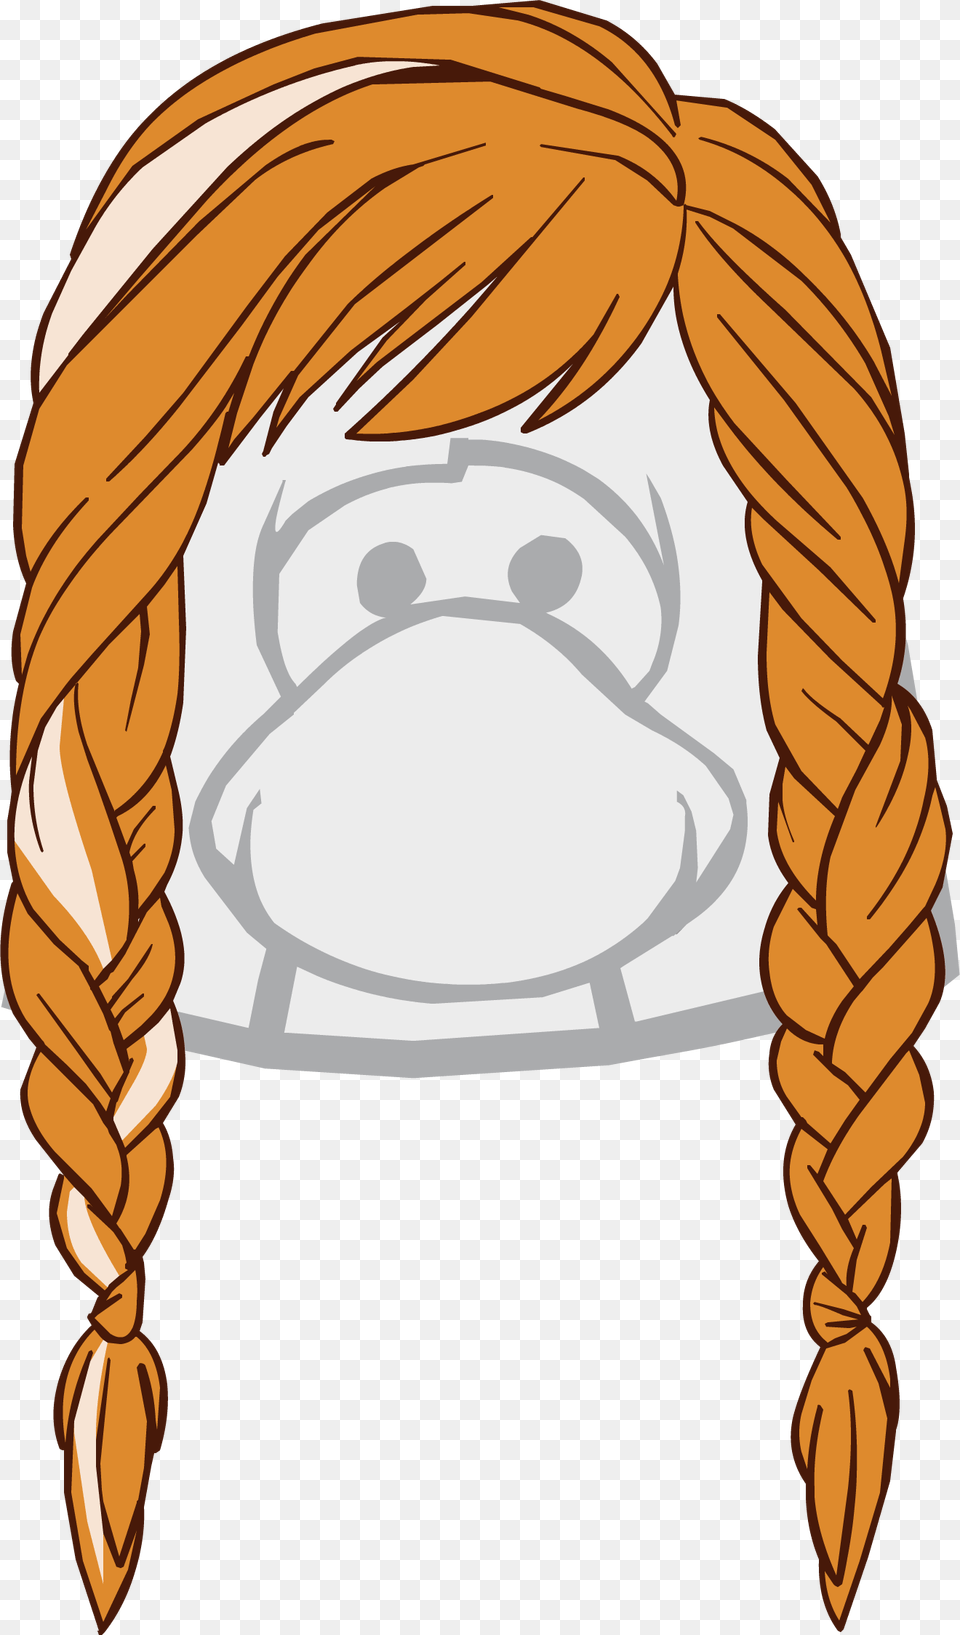 The Winter Traveler Club Penguin Ponytail, Adult, Male, Man, Person Png